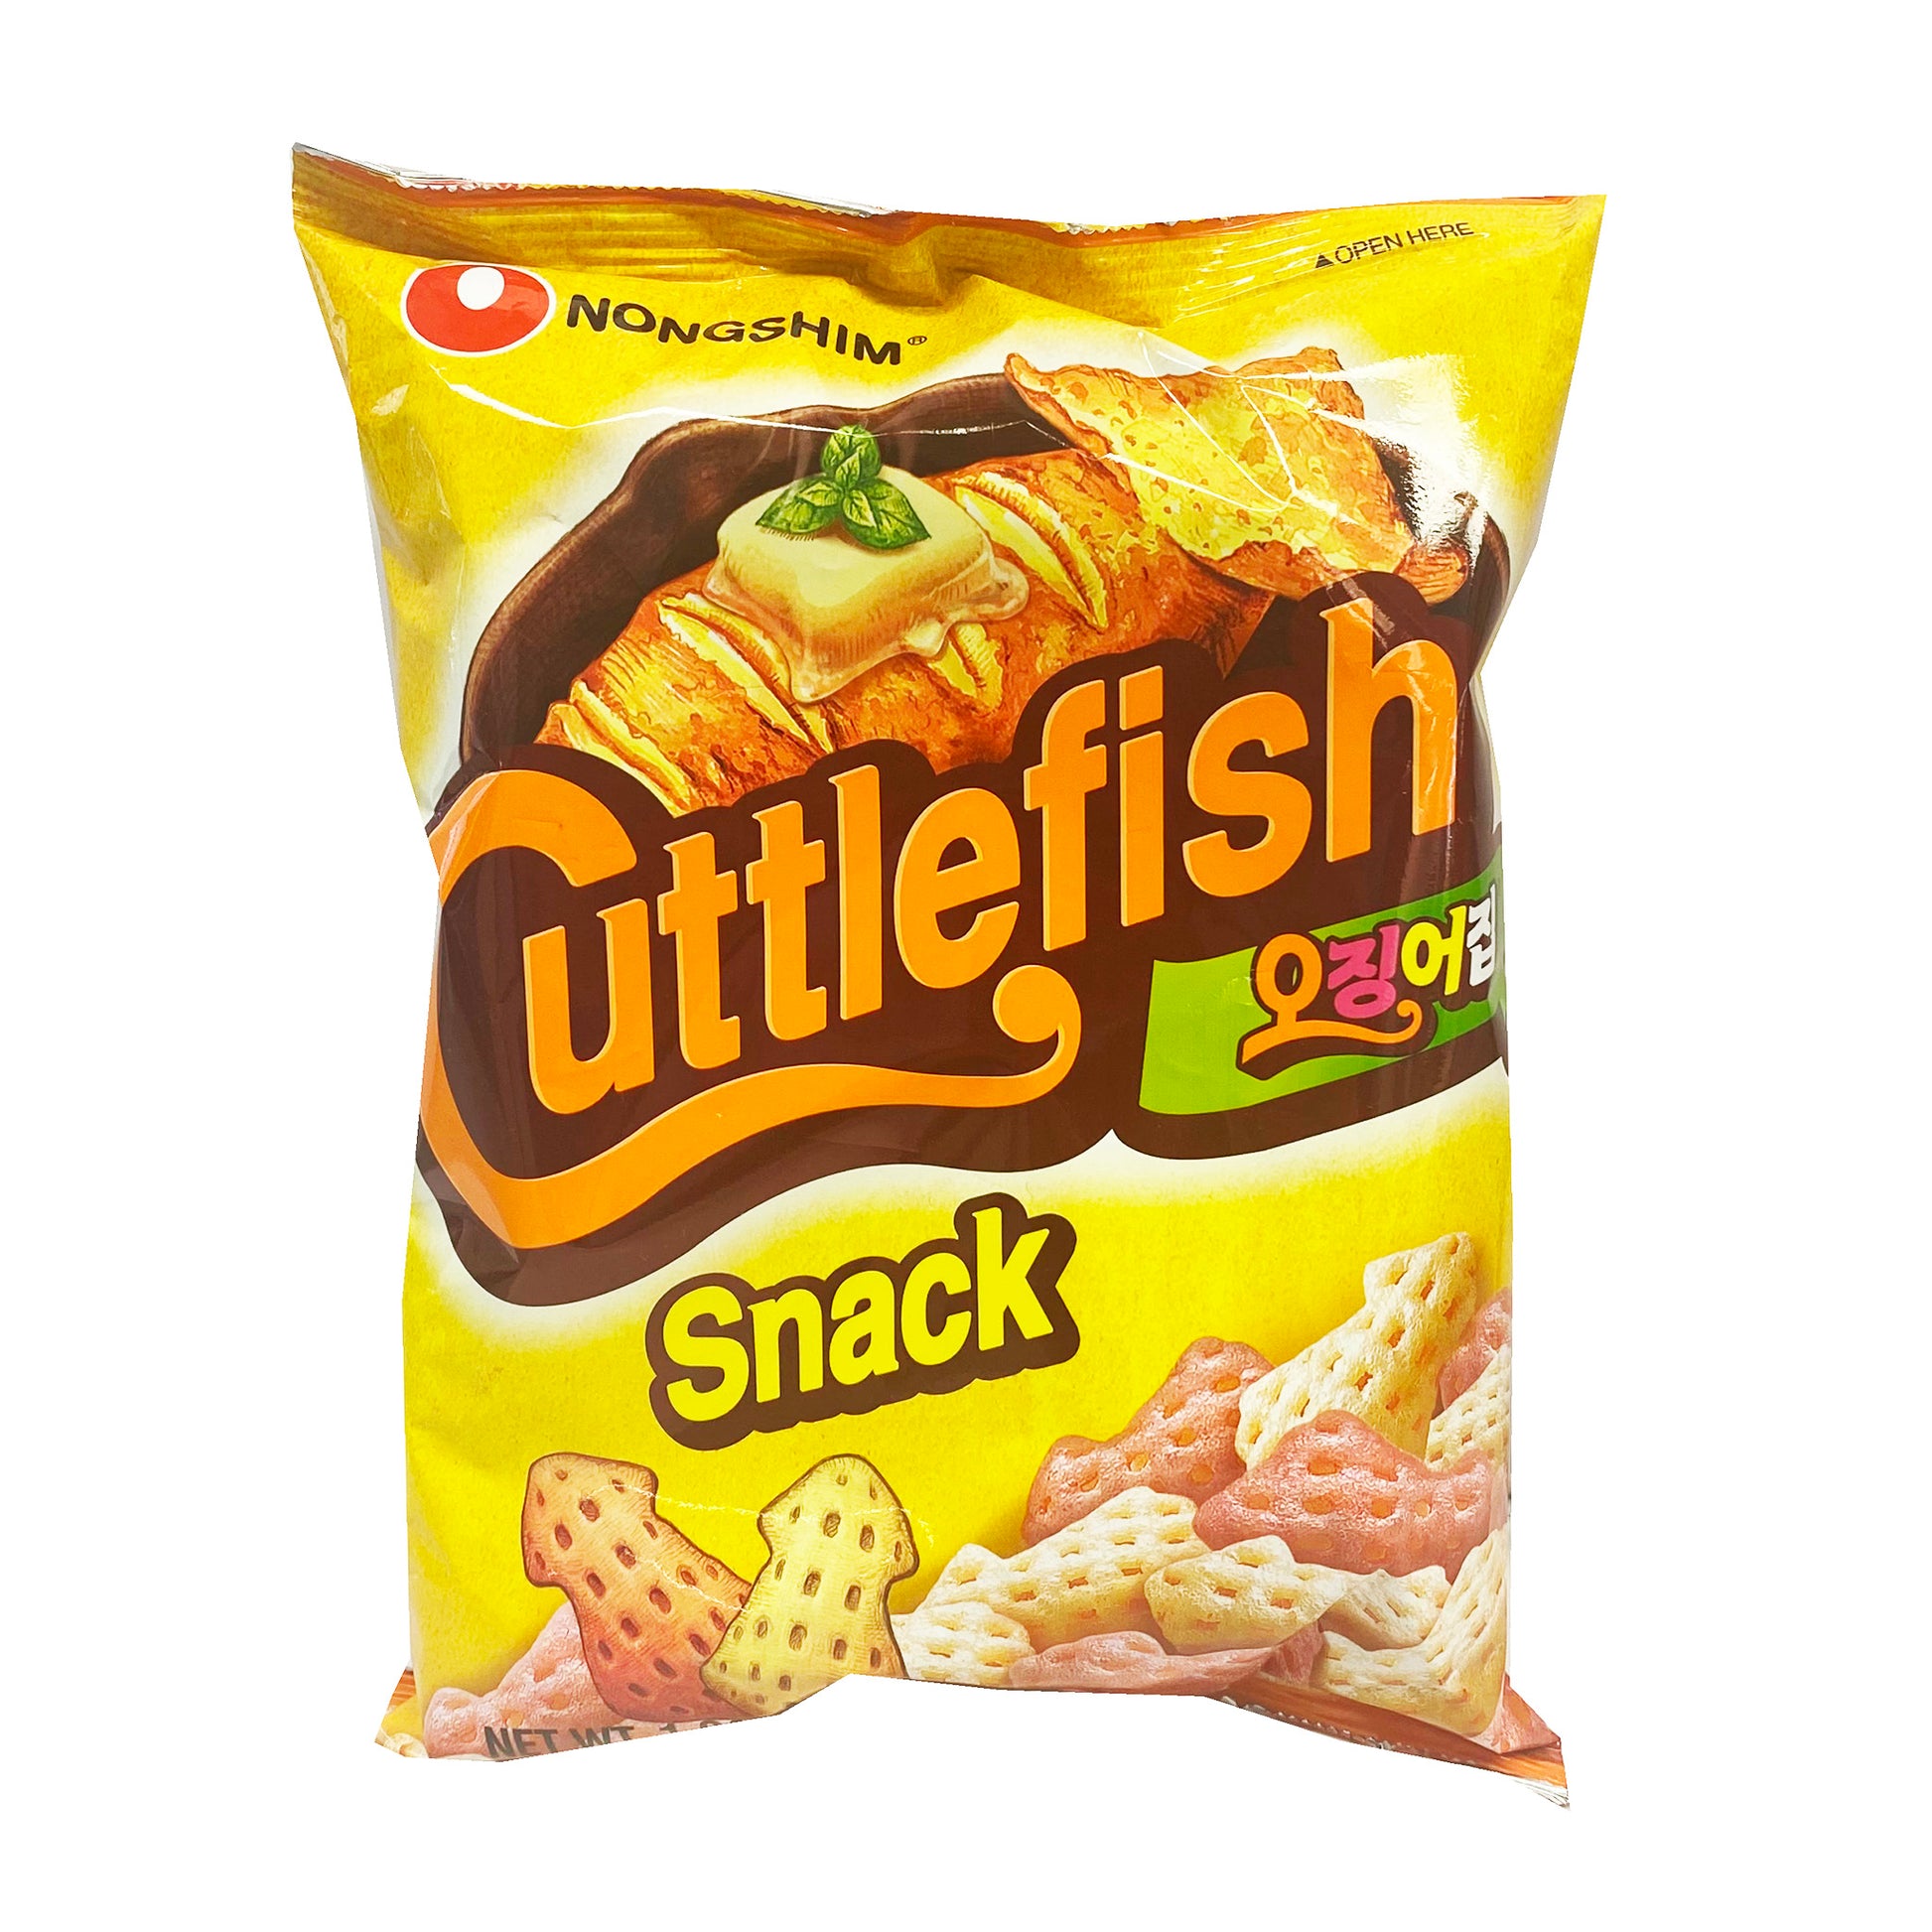 Front graphic image of Nongshim Cuttlefish Snack 1.94oz